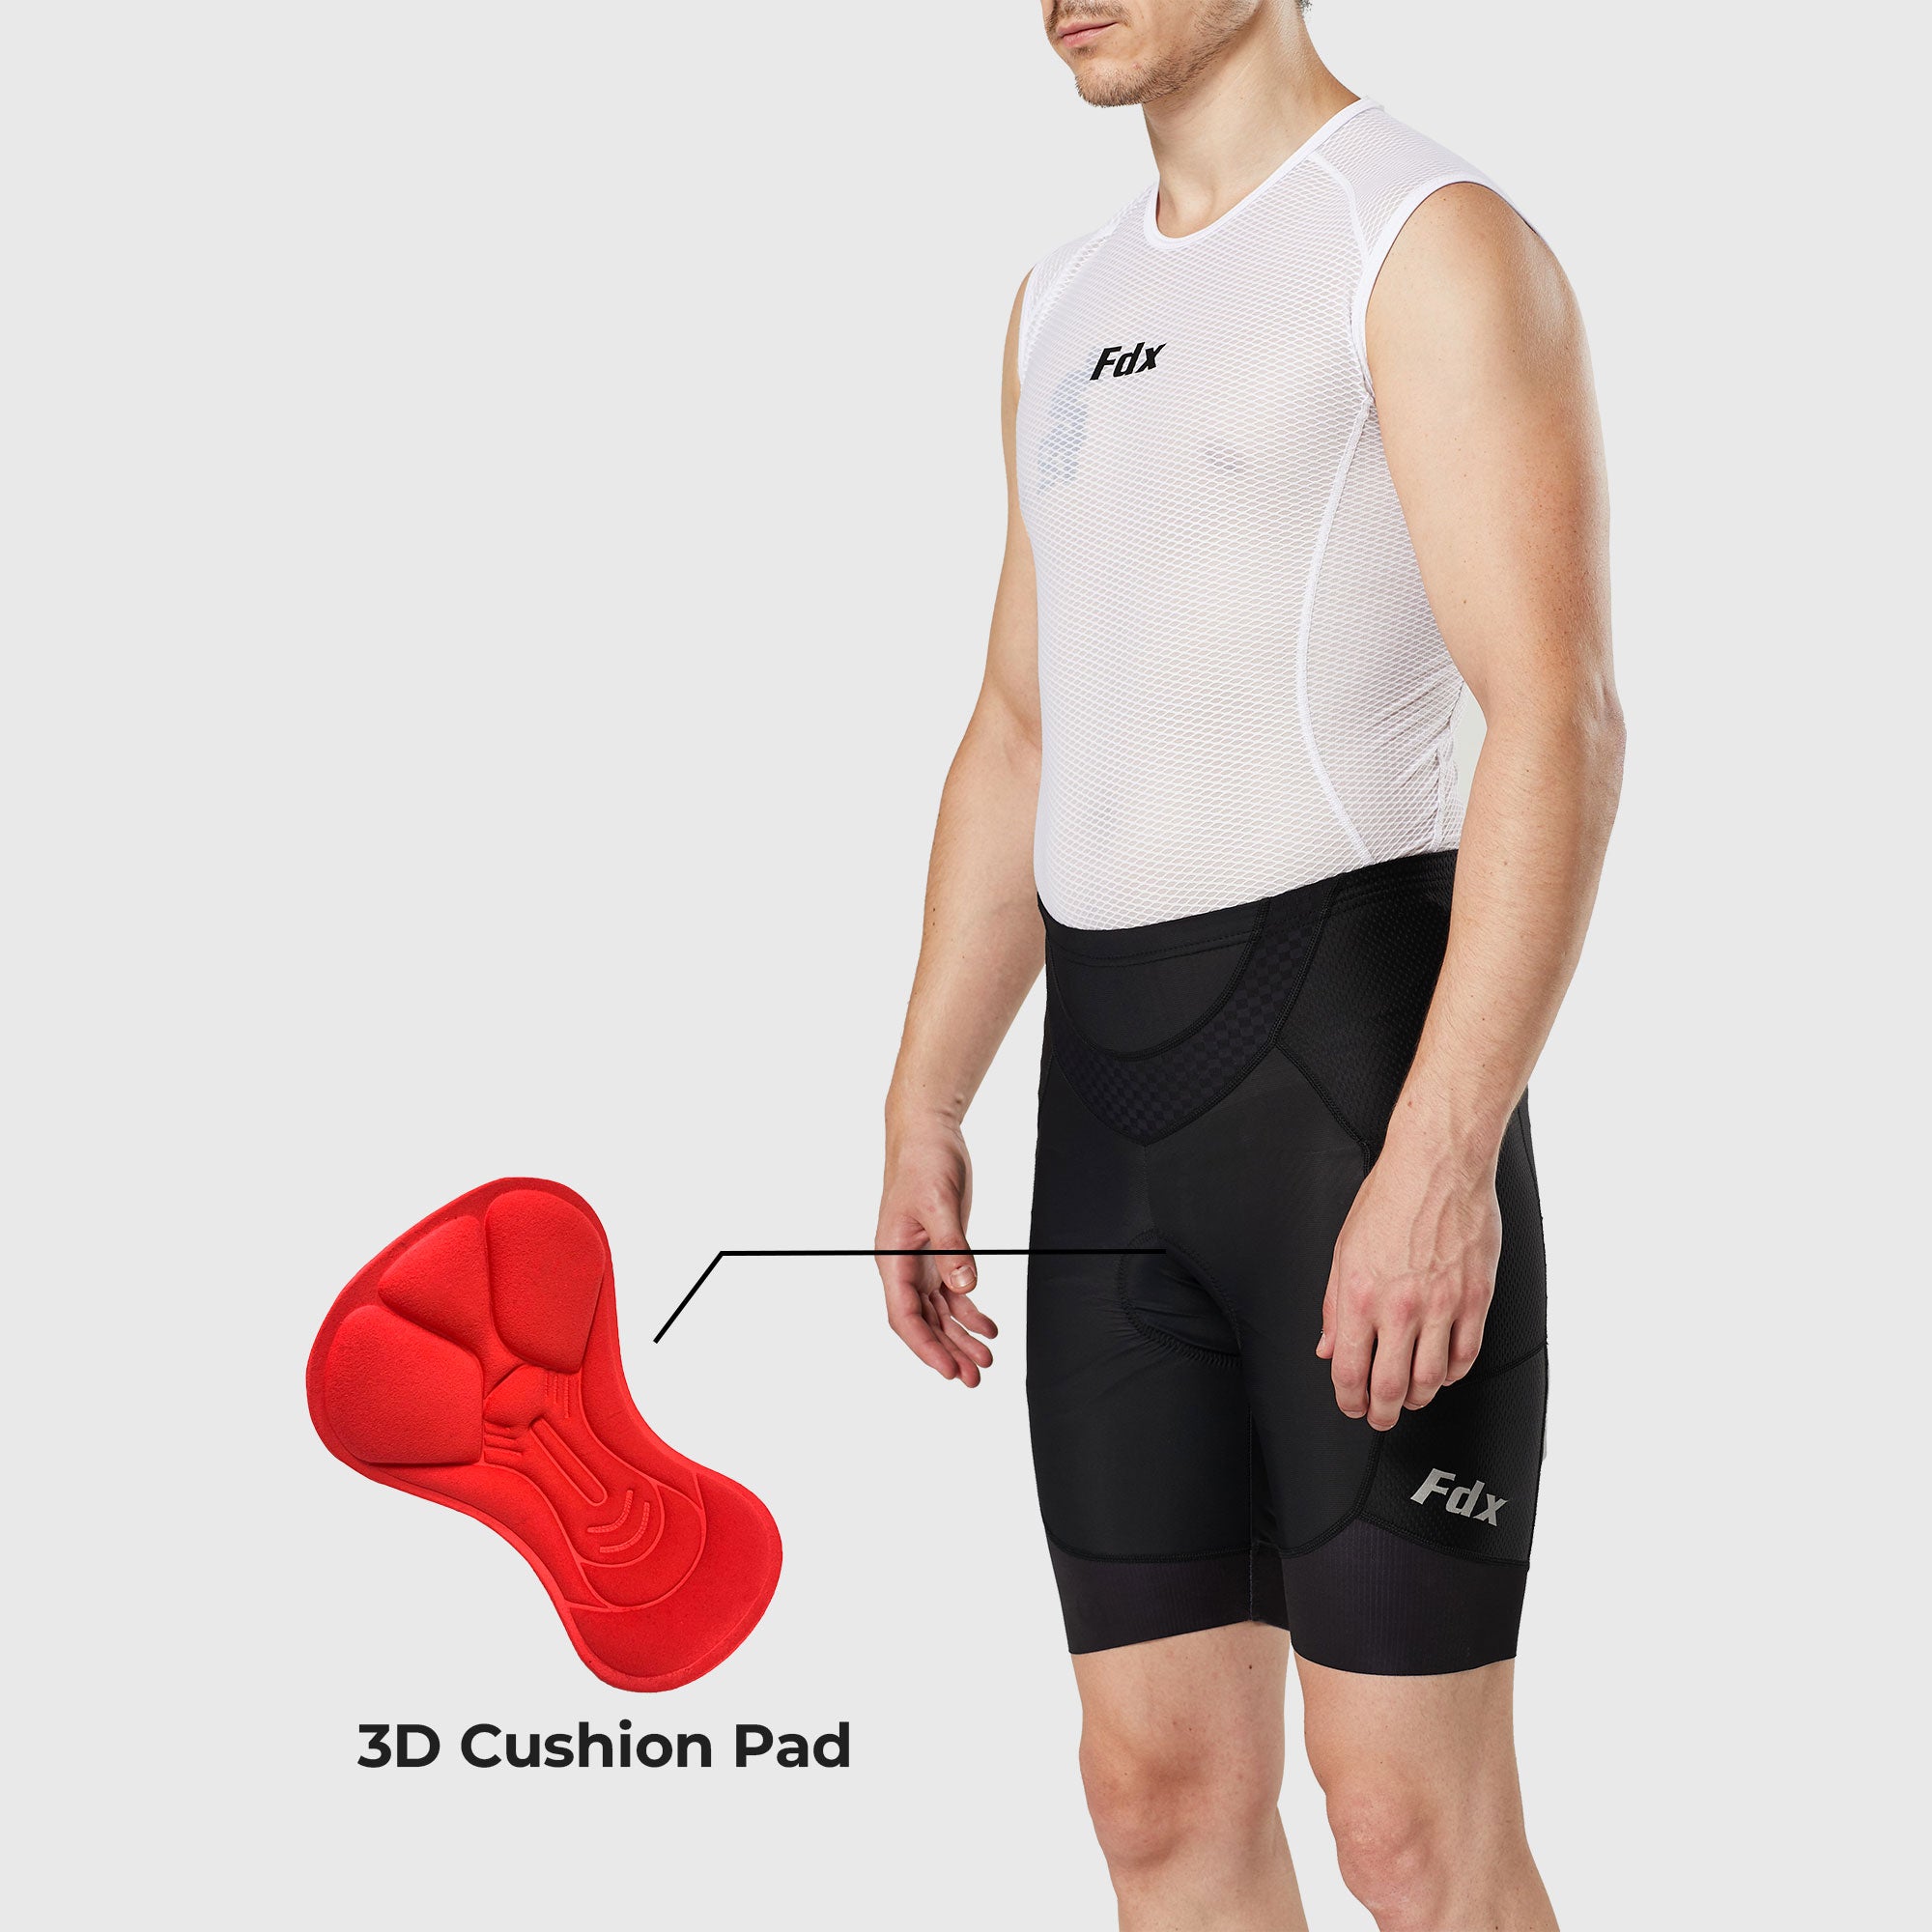 Men’s Black Cycling Shorts 3D Gel Padded comfortable road bike shorts - Breathable Quick Dry biking shorts, ultra-lightweight shorts with pockets